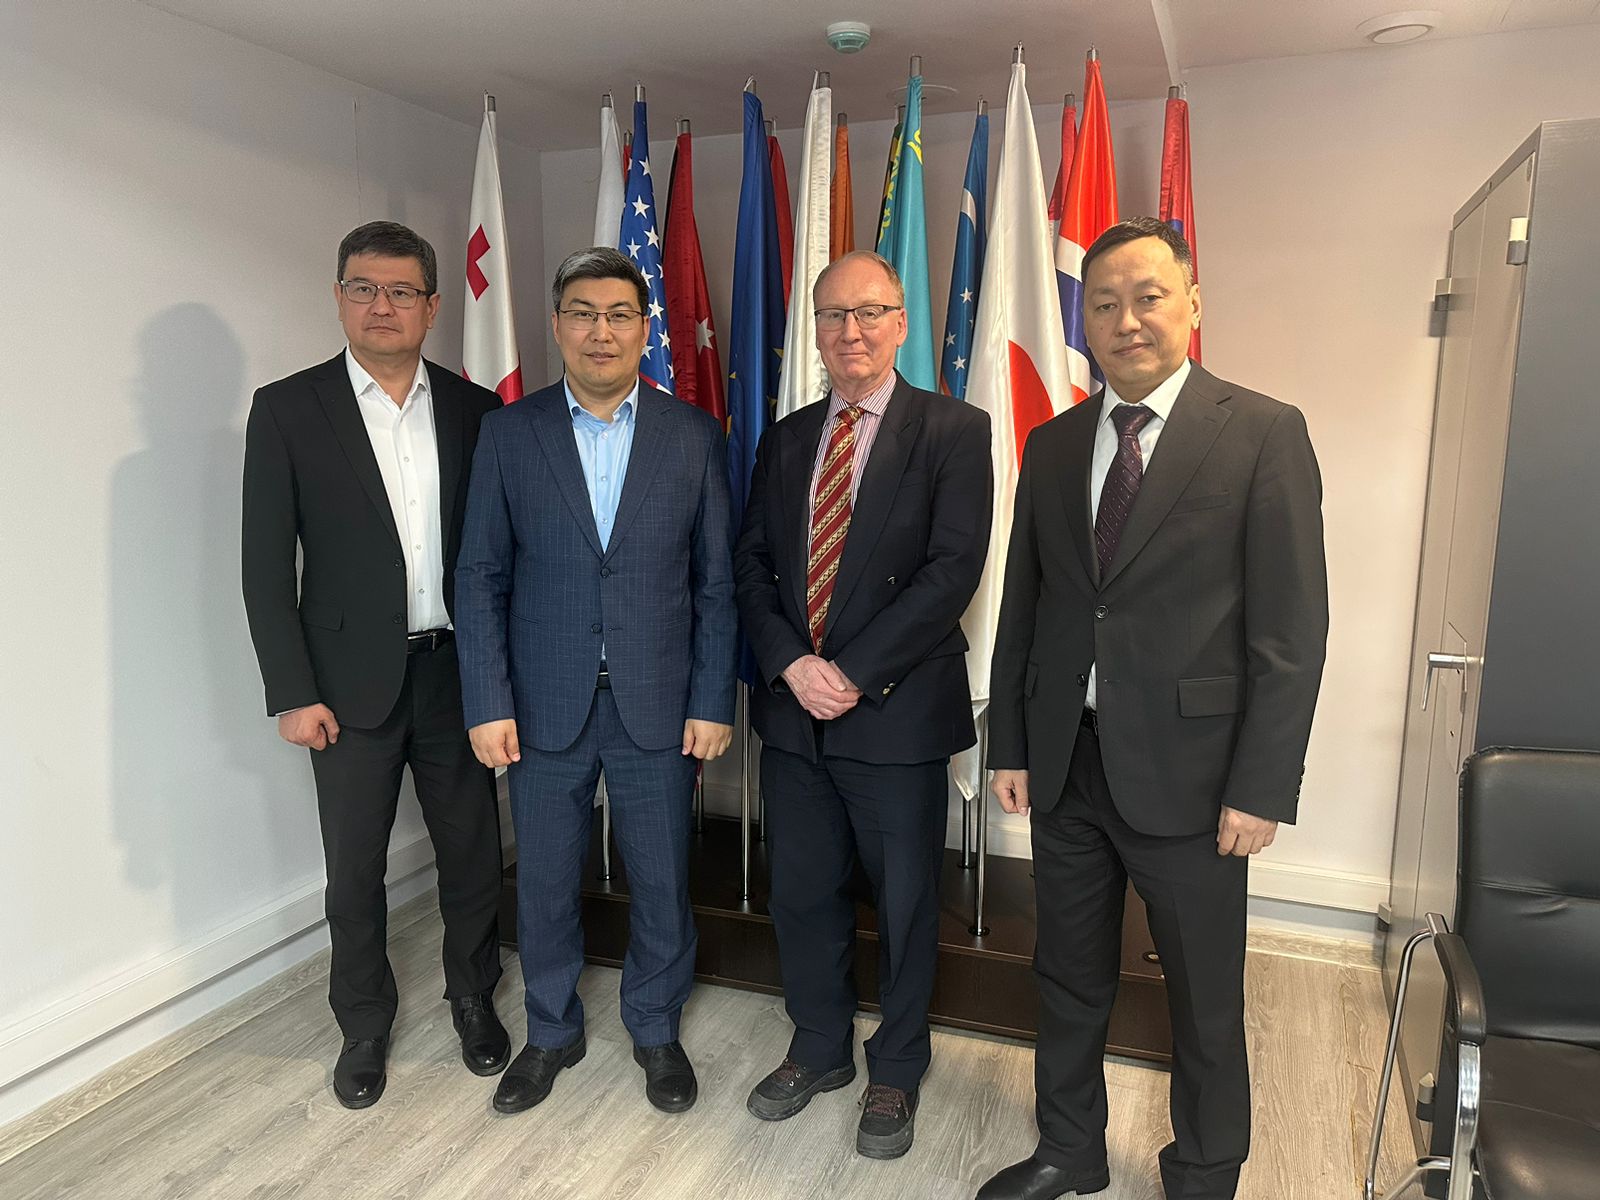 ISTC met with the Ministry of Health of the Republic of Kazakhstan